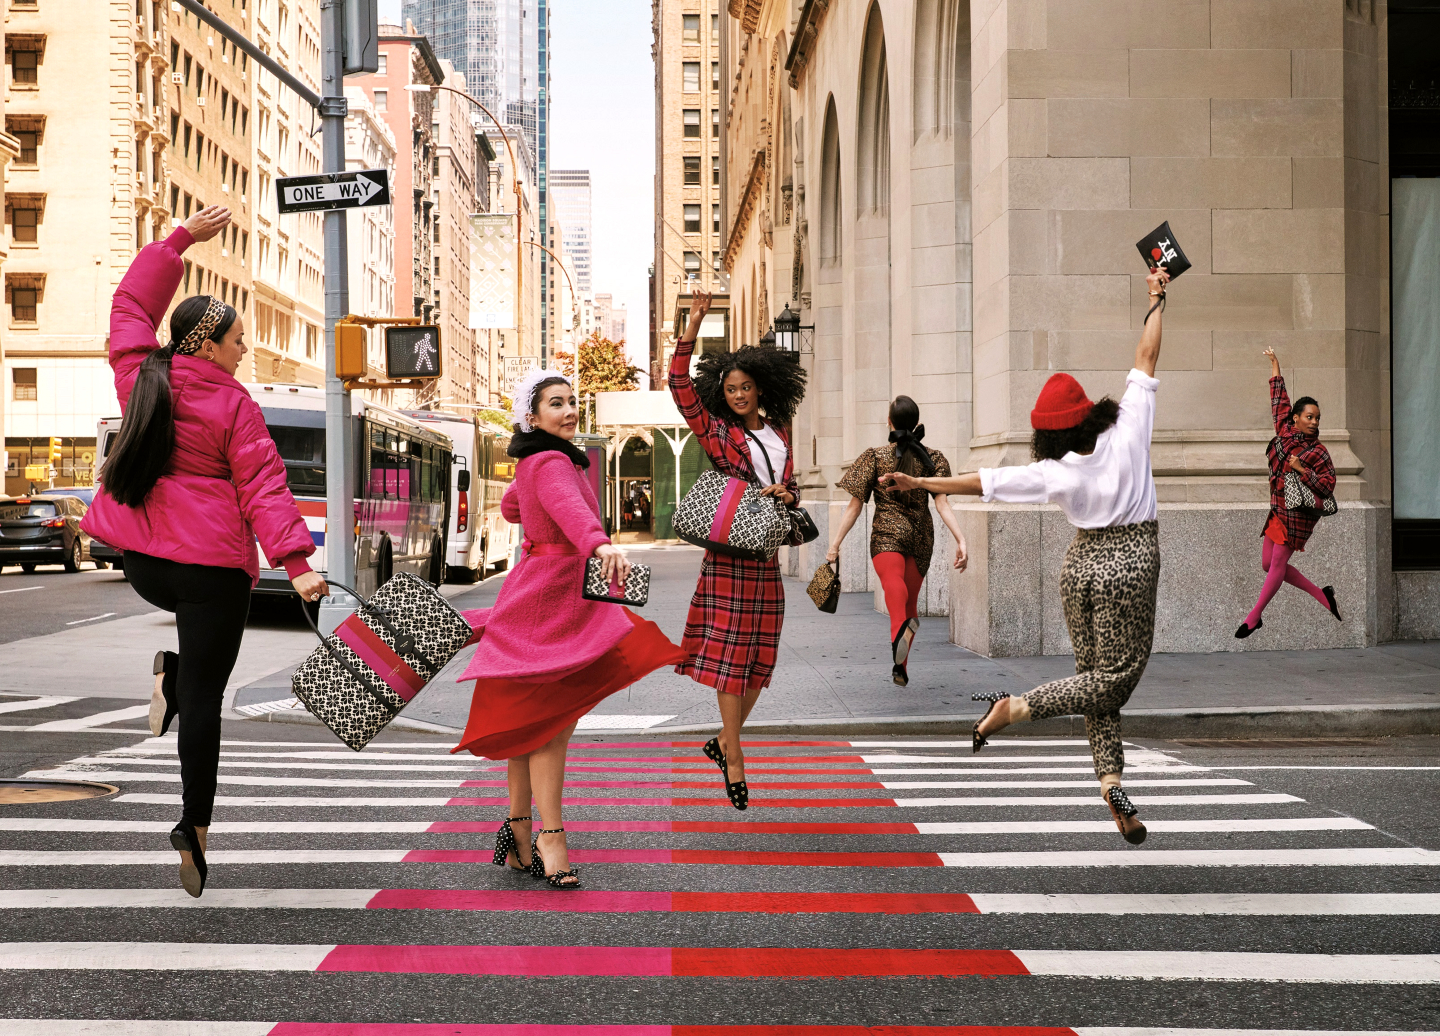 Kate Spade New York's Autumn 2021 campaign captures spirit of the Big Apple  through song and dance | Options, The Edge